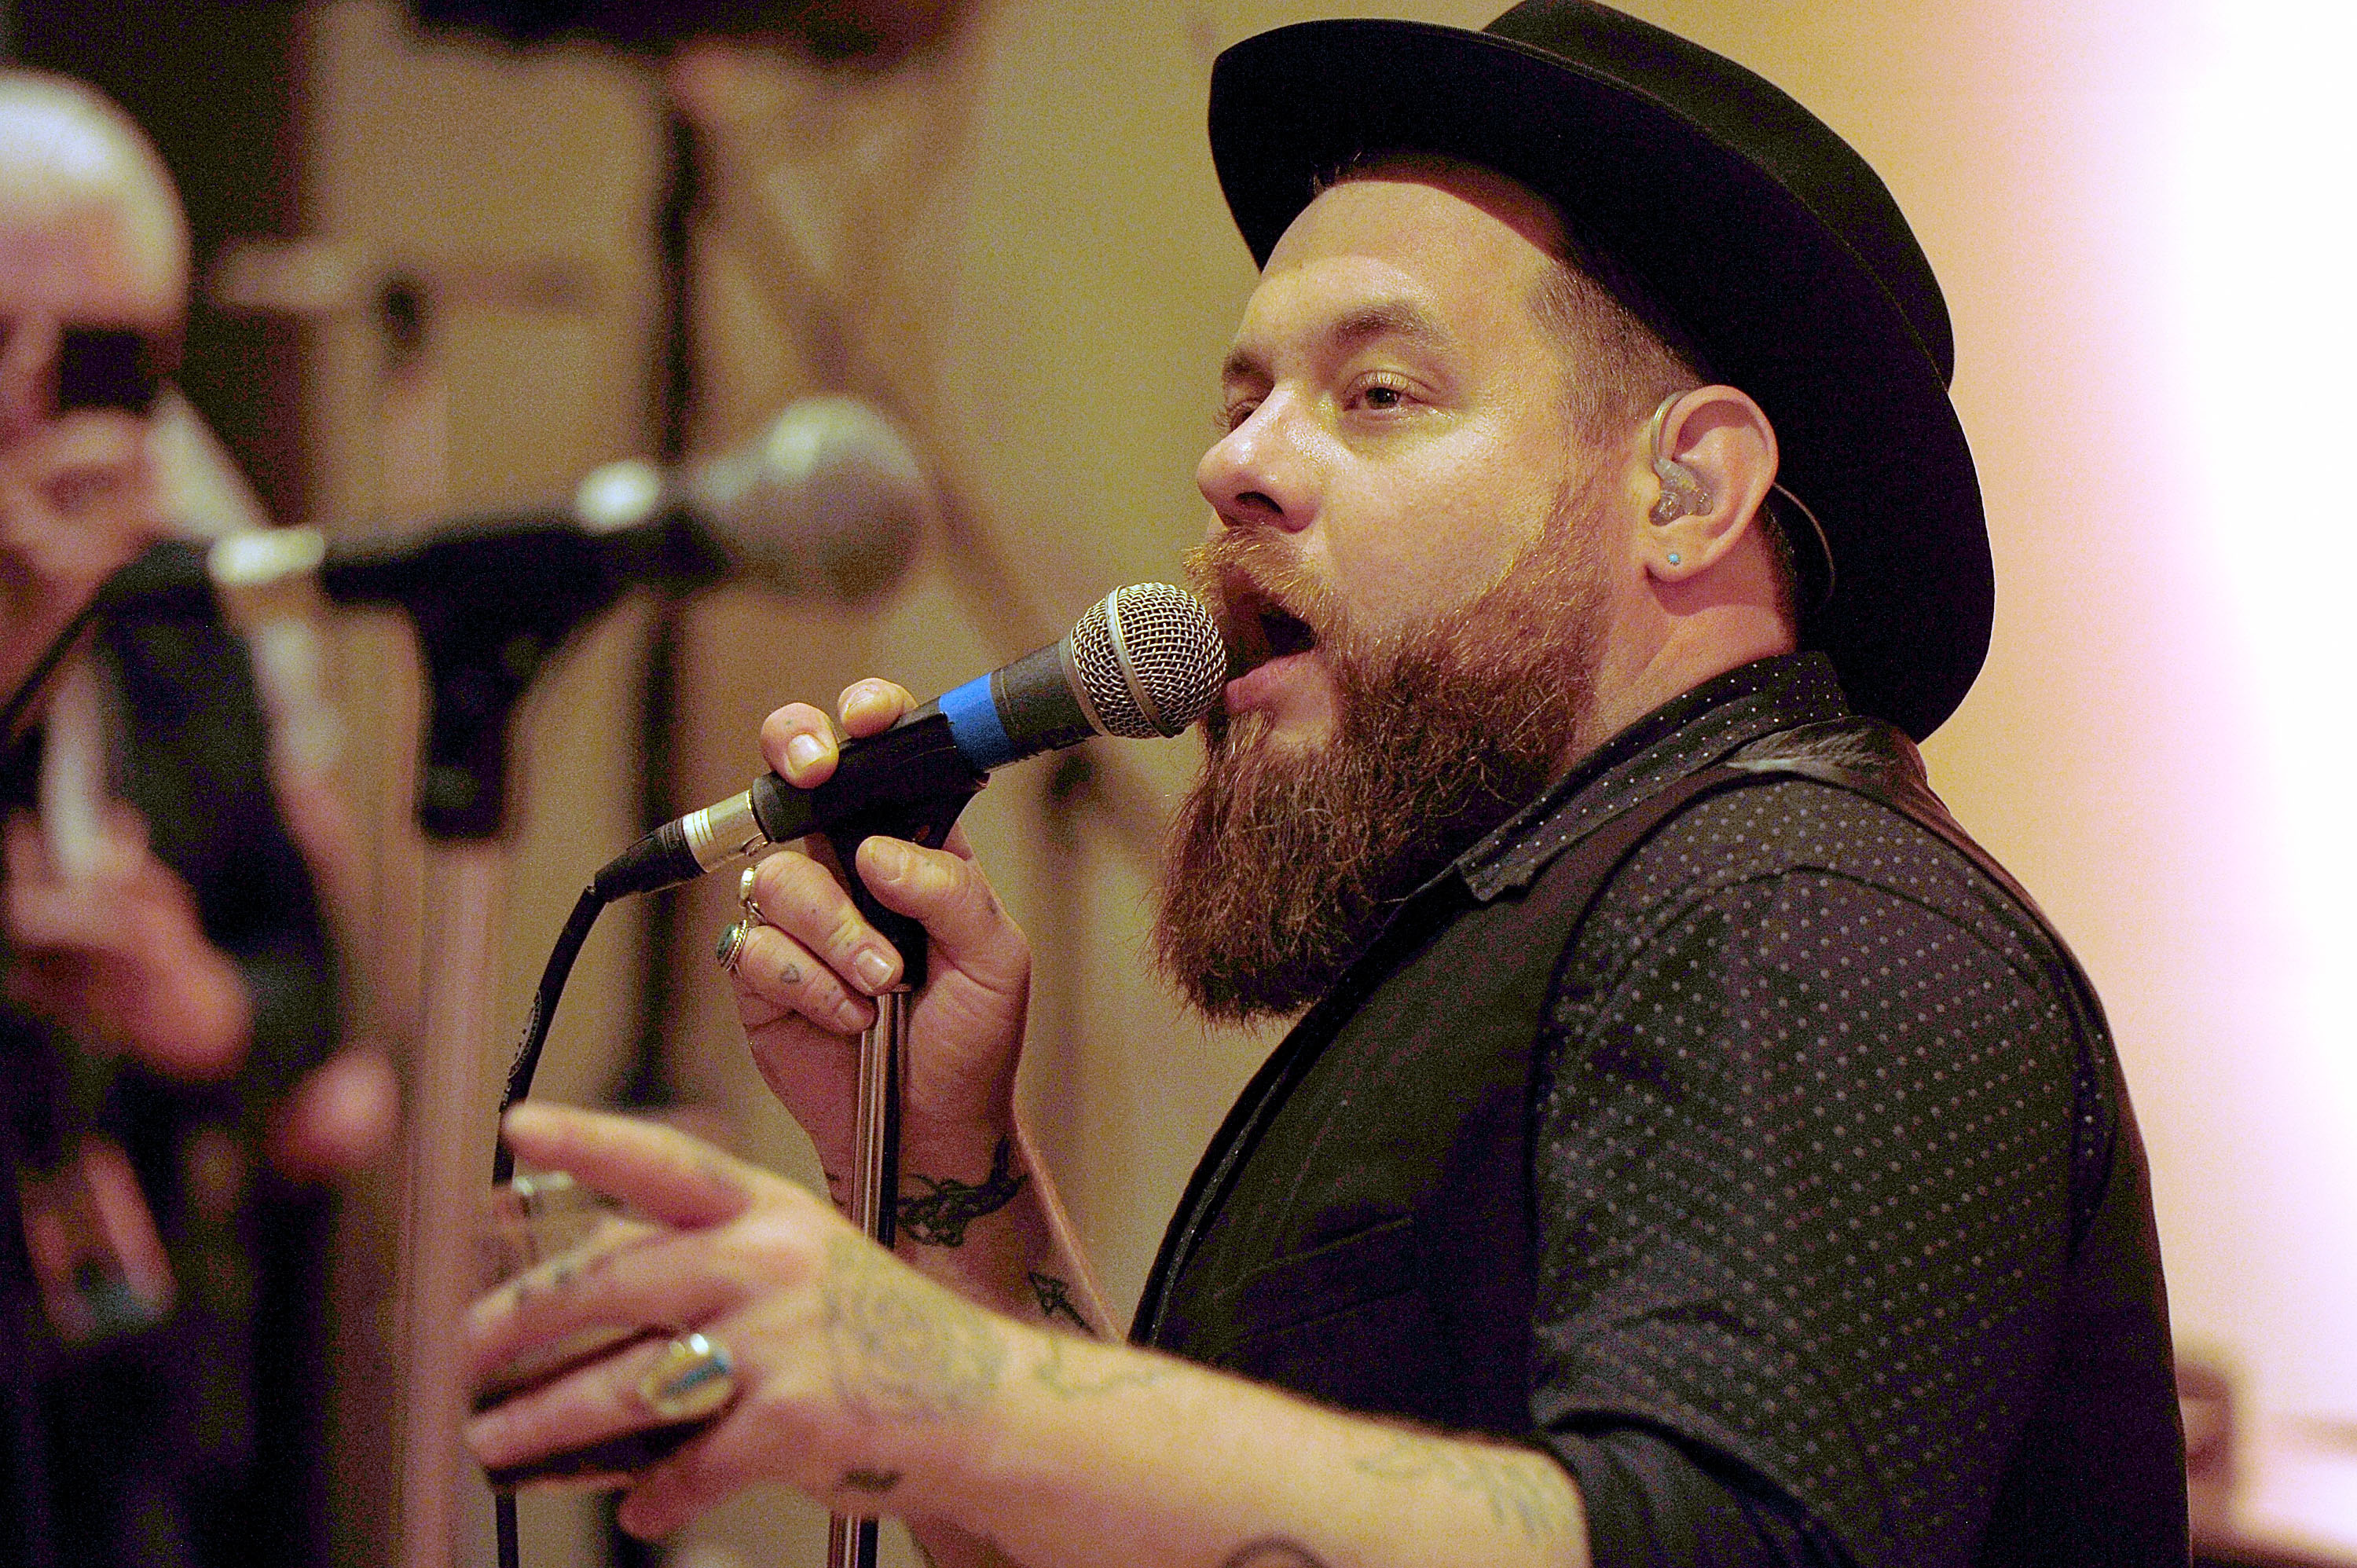 "Nathaniel Rateliff Performs Live On SiriusXM's The Spectrum Channel At The Stax Museum Of American Soul Music"